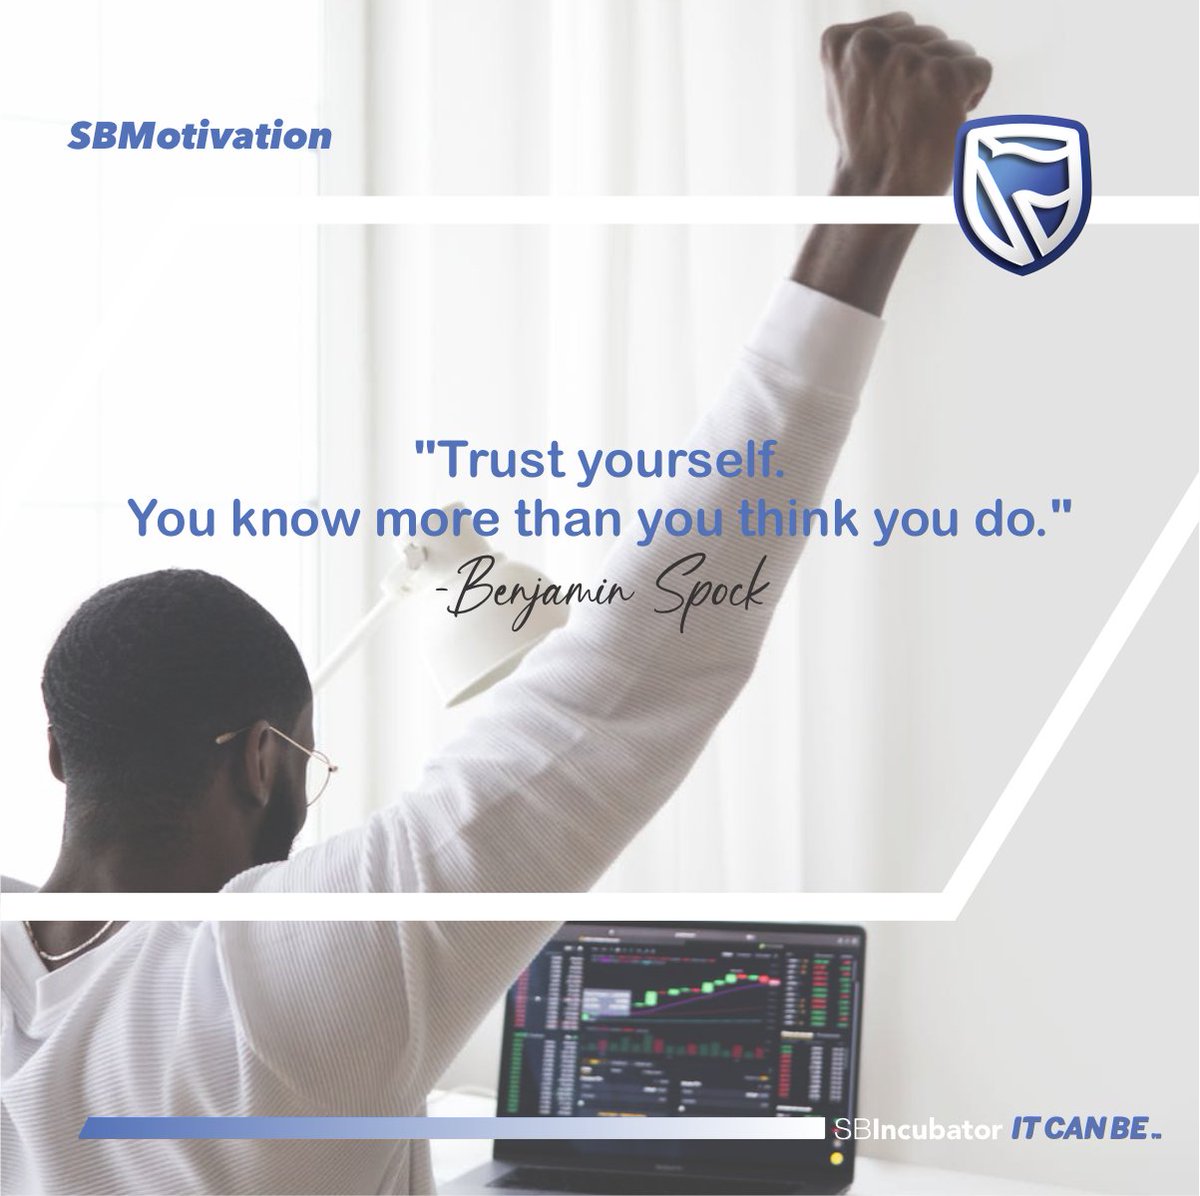 'Trust yourself. You know more than you think you do.' -Benjamin Spock #SBMotivation #SBIncubatorgh #Trust